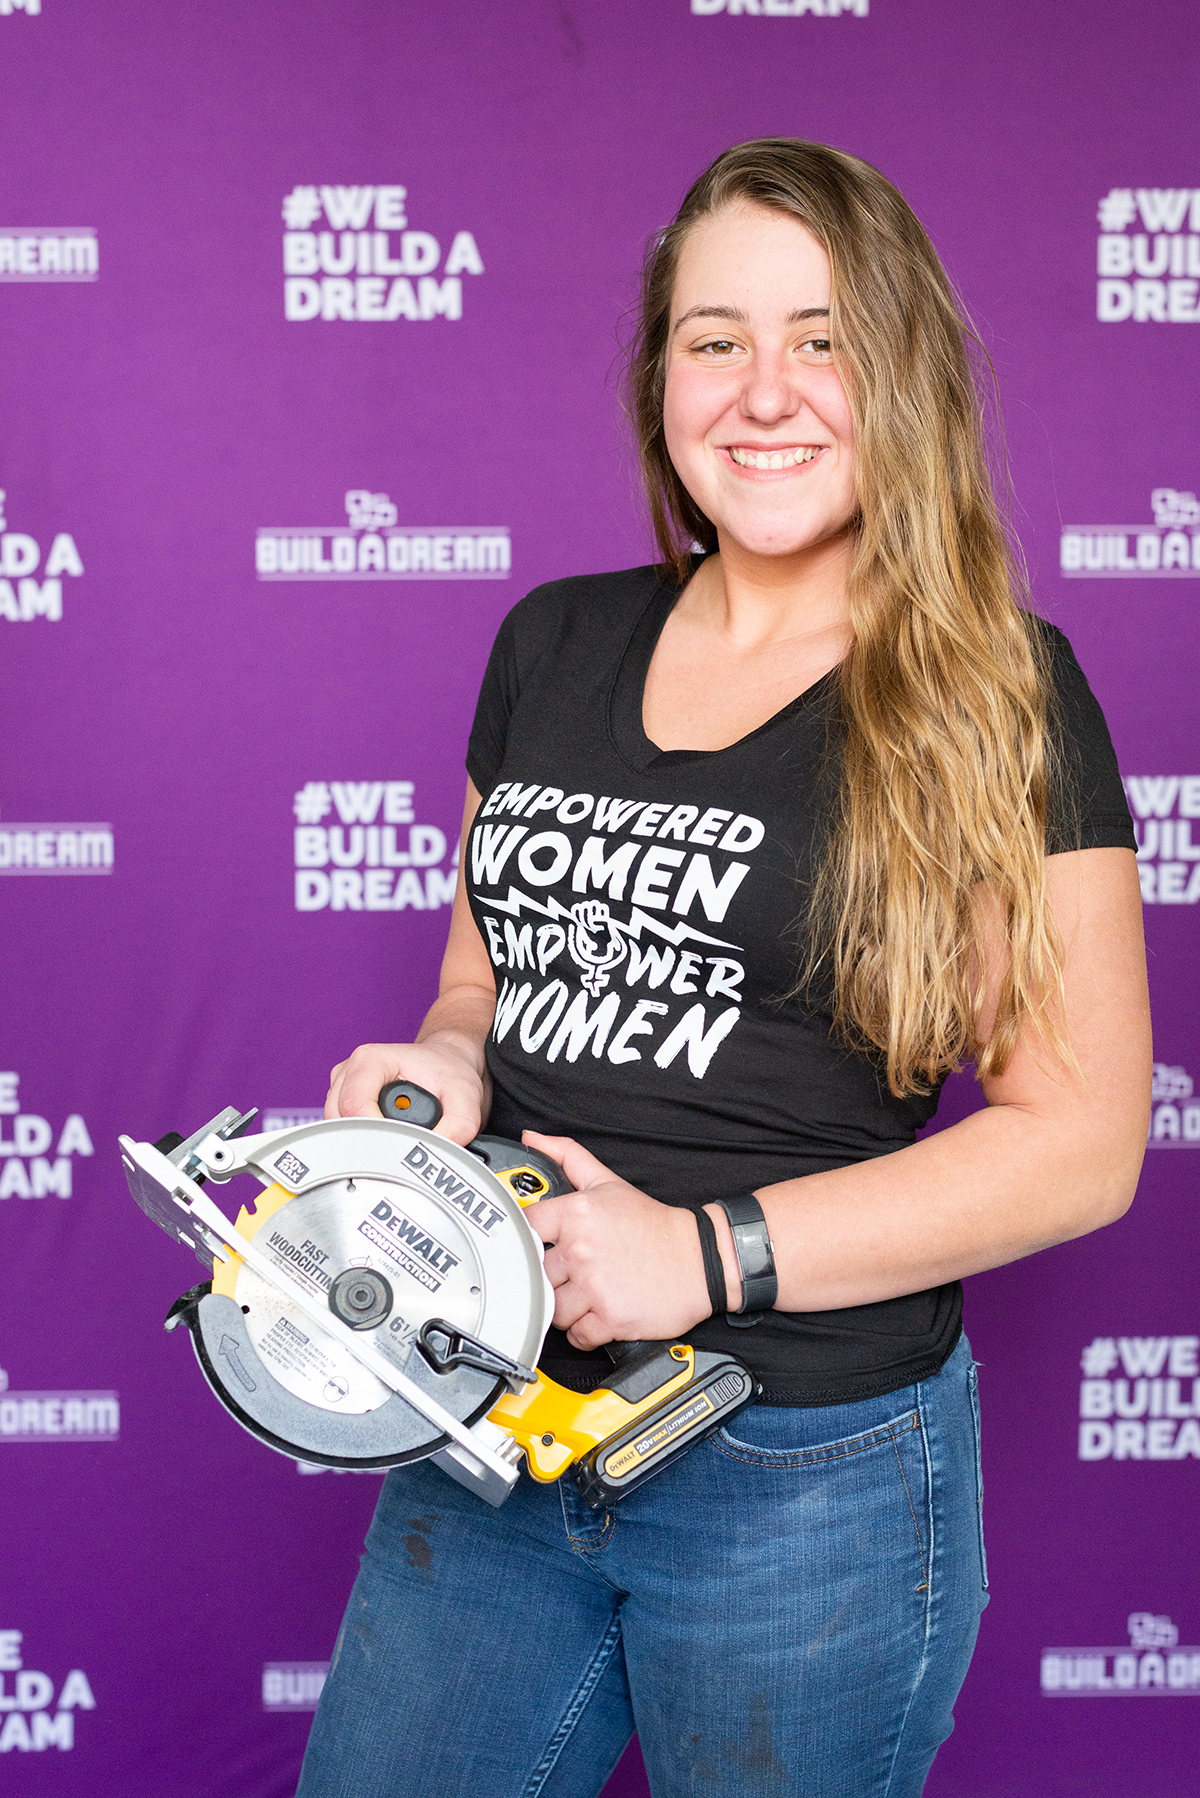 Delaney Krieger stands in front of a purple Build a Dream backdrop and is wearing a black tshirt and holding a circular saw.